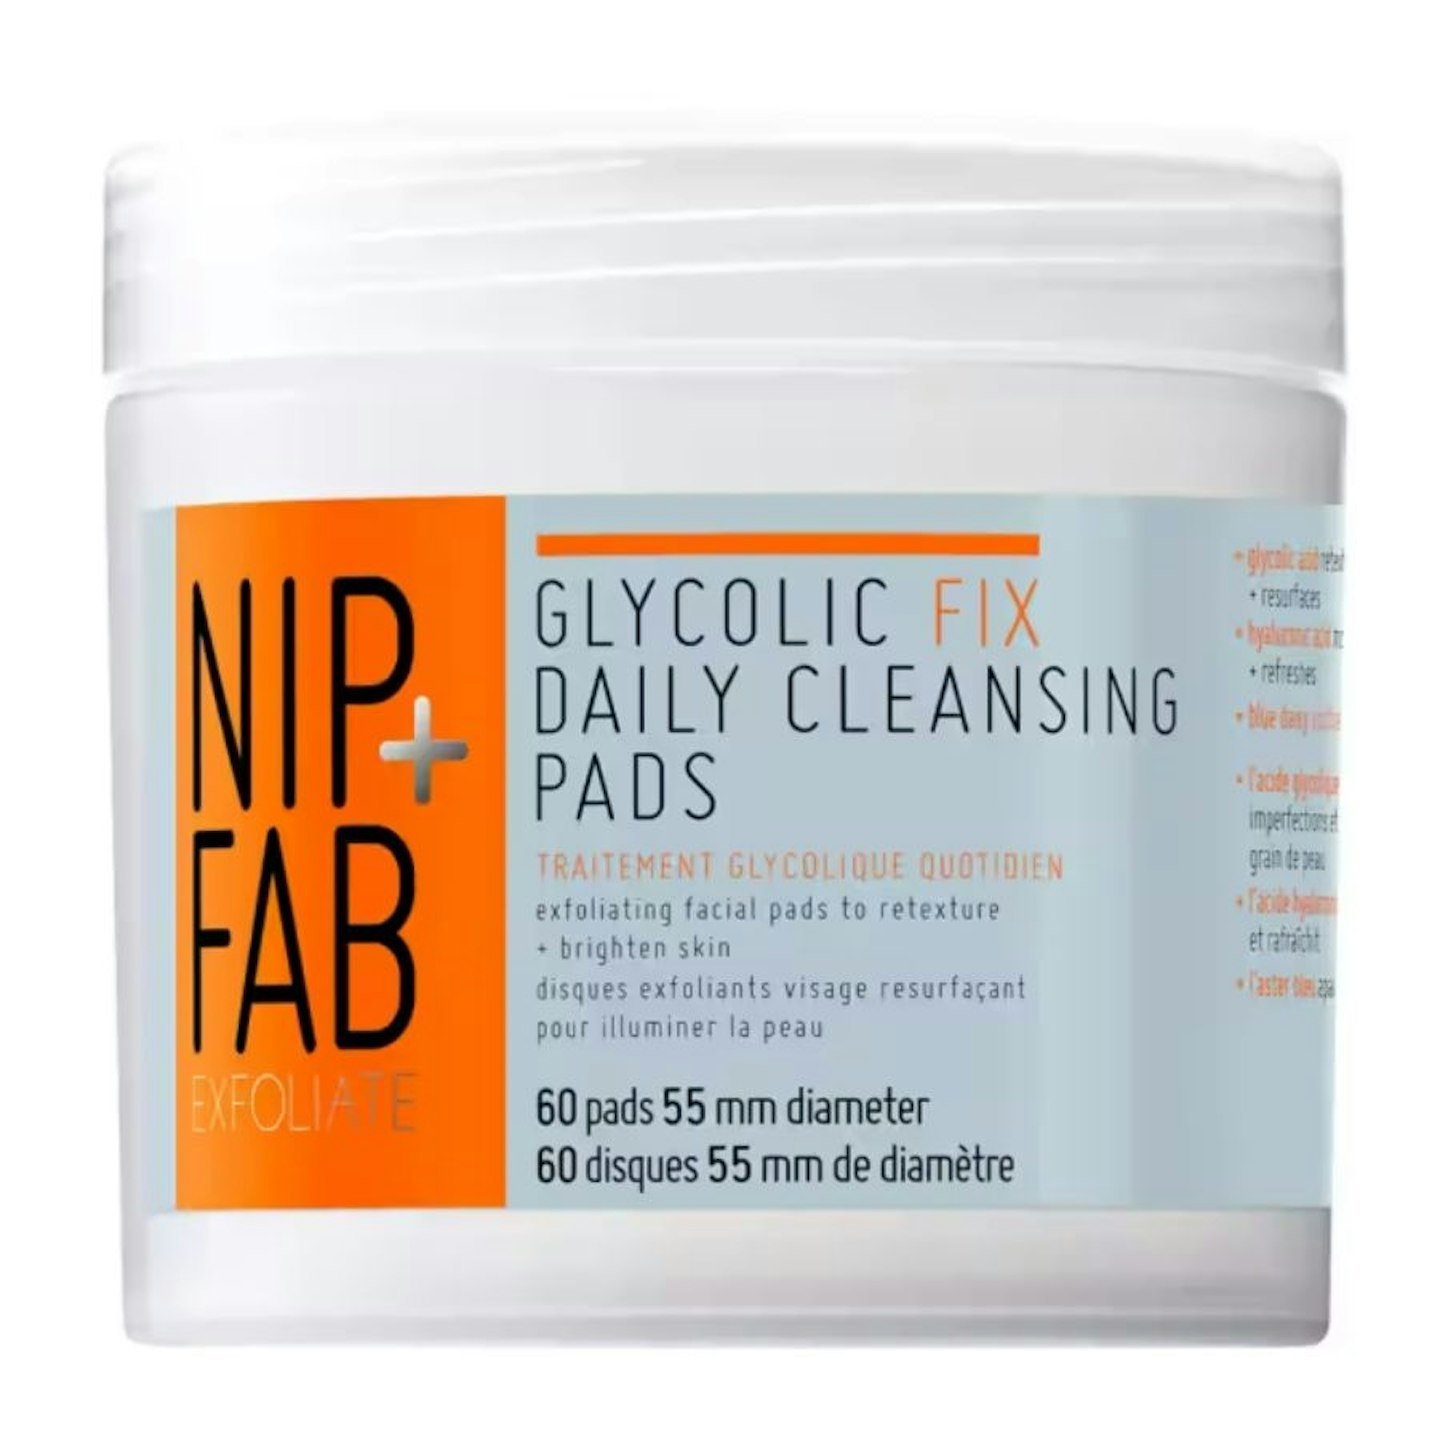 NIP+FAB Glycolic Fix Daily Cleansing Pads 60 pack